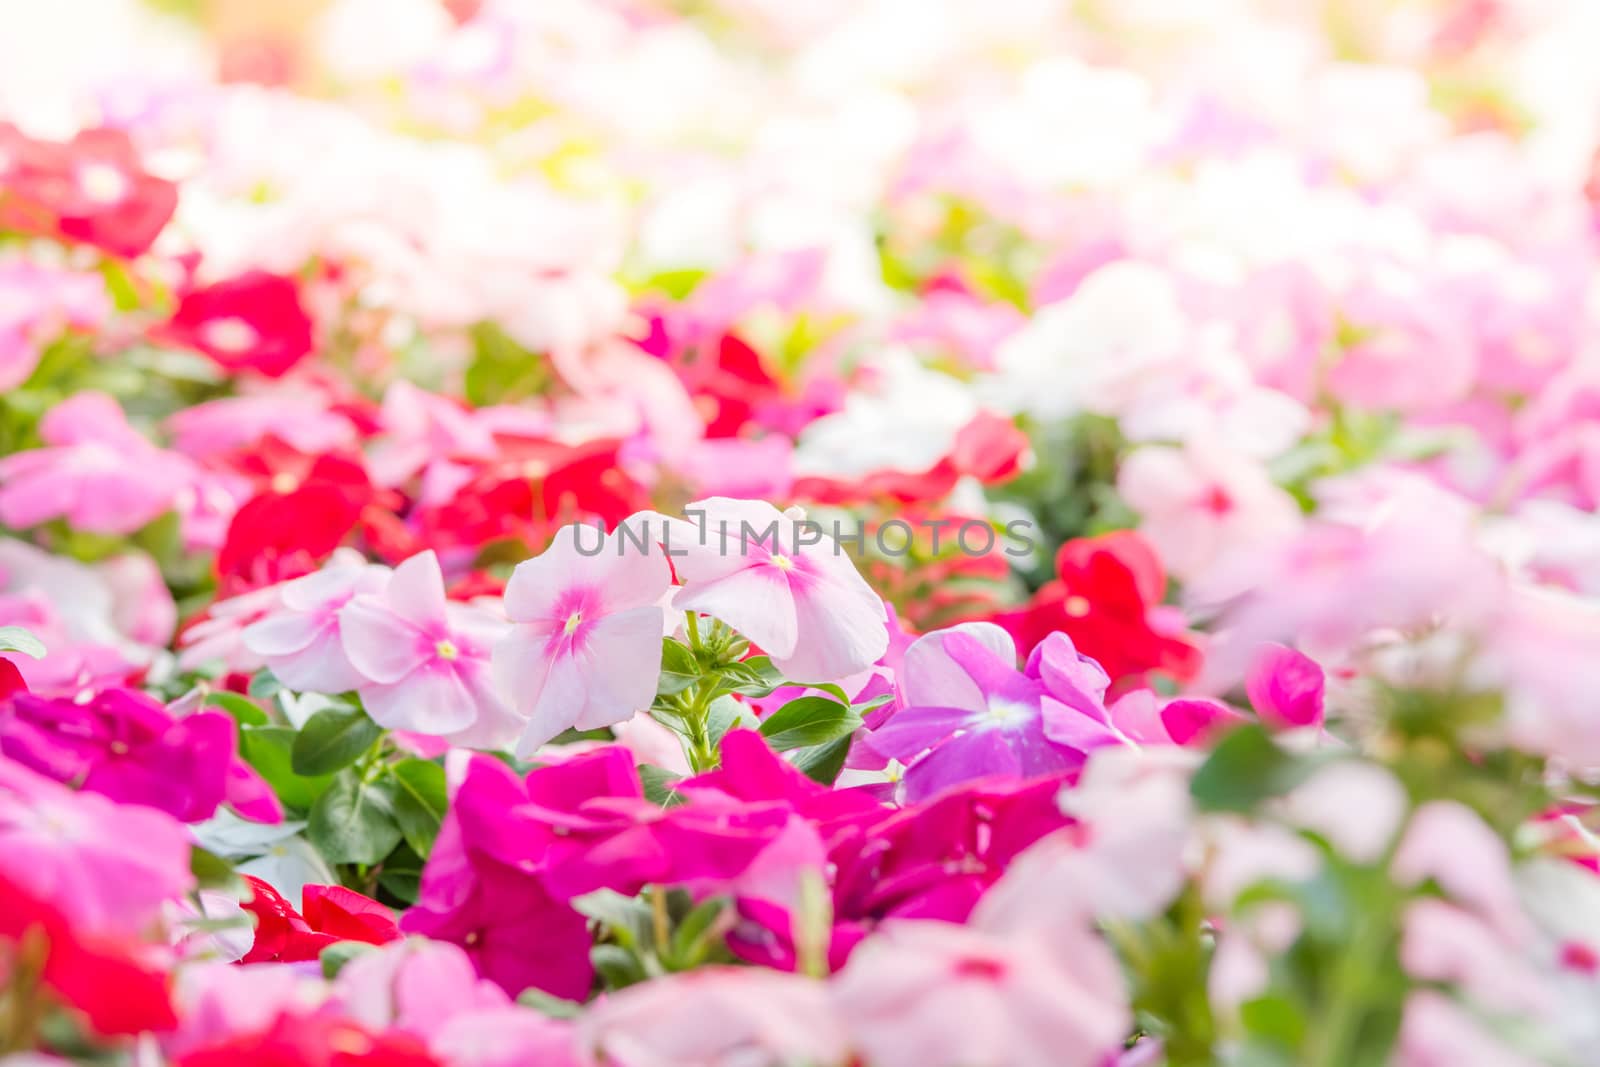 Vinca rosea flowers blossom in the garden, foliage variety of co by yuiyuize